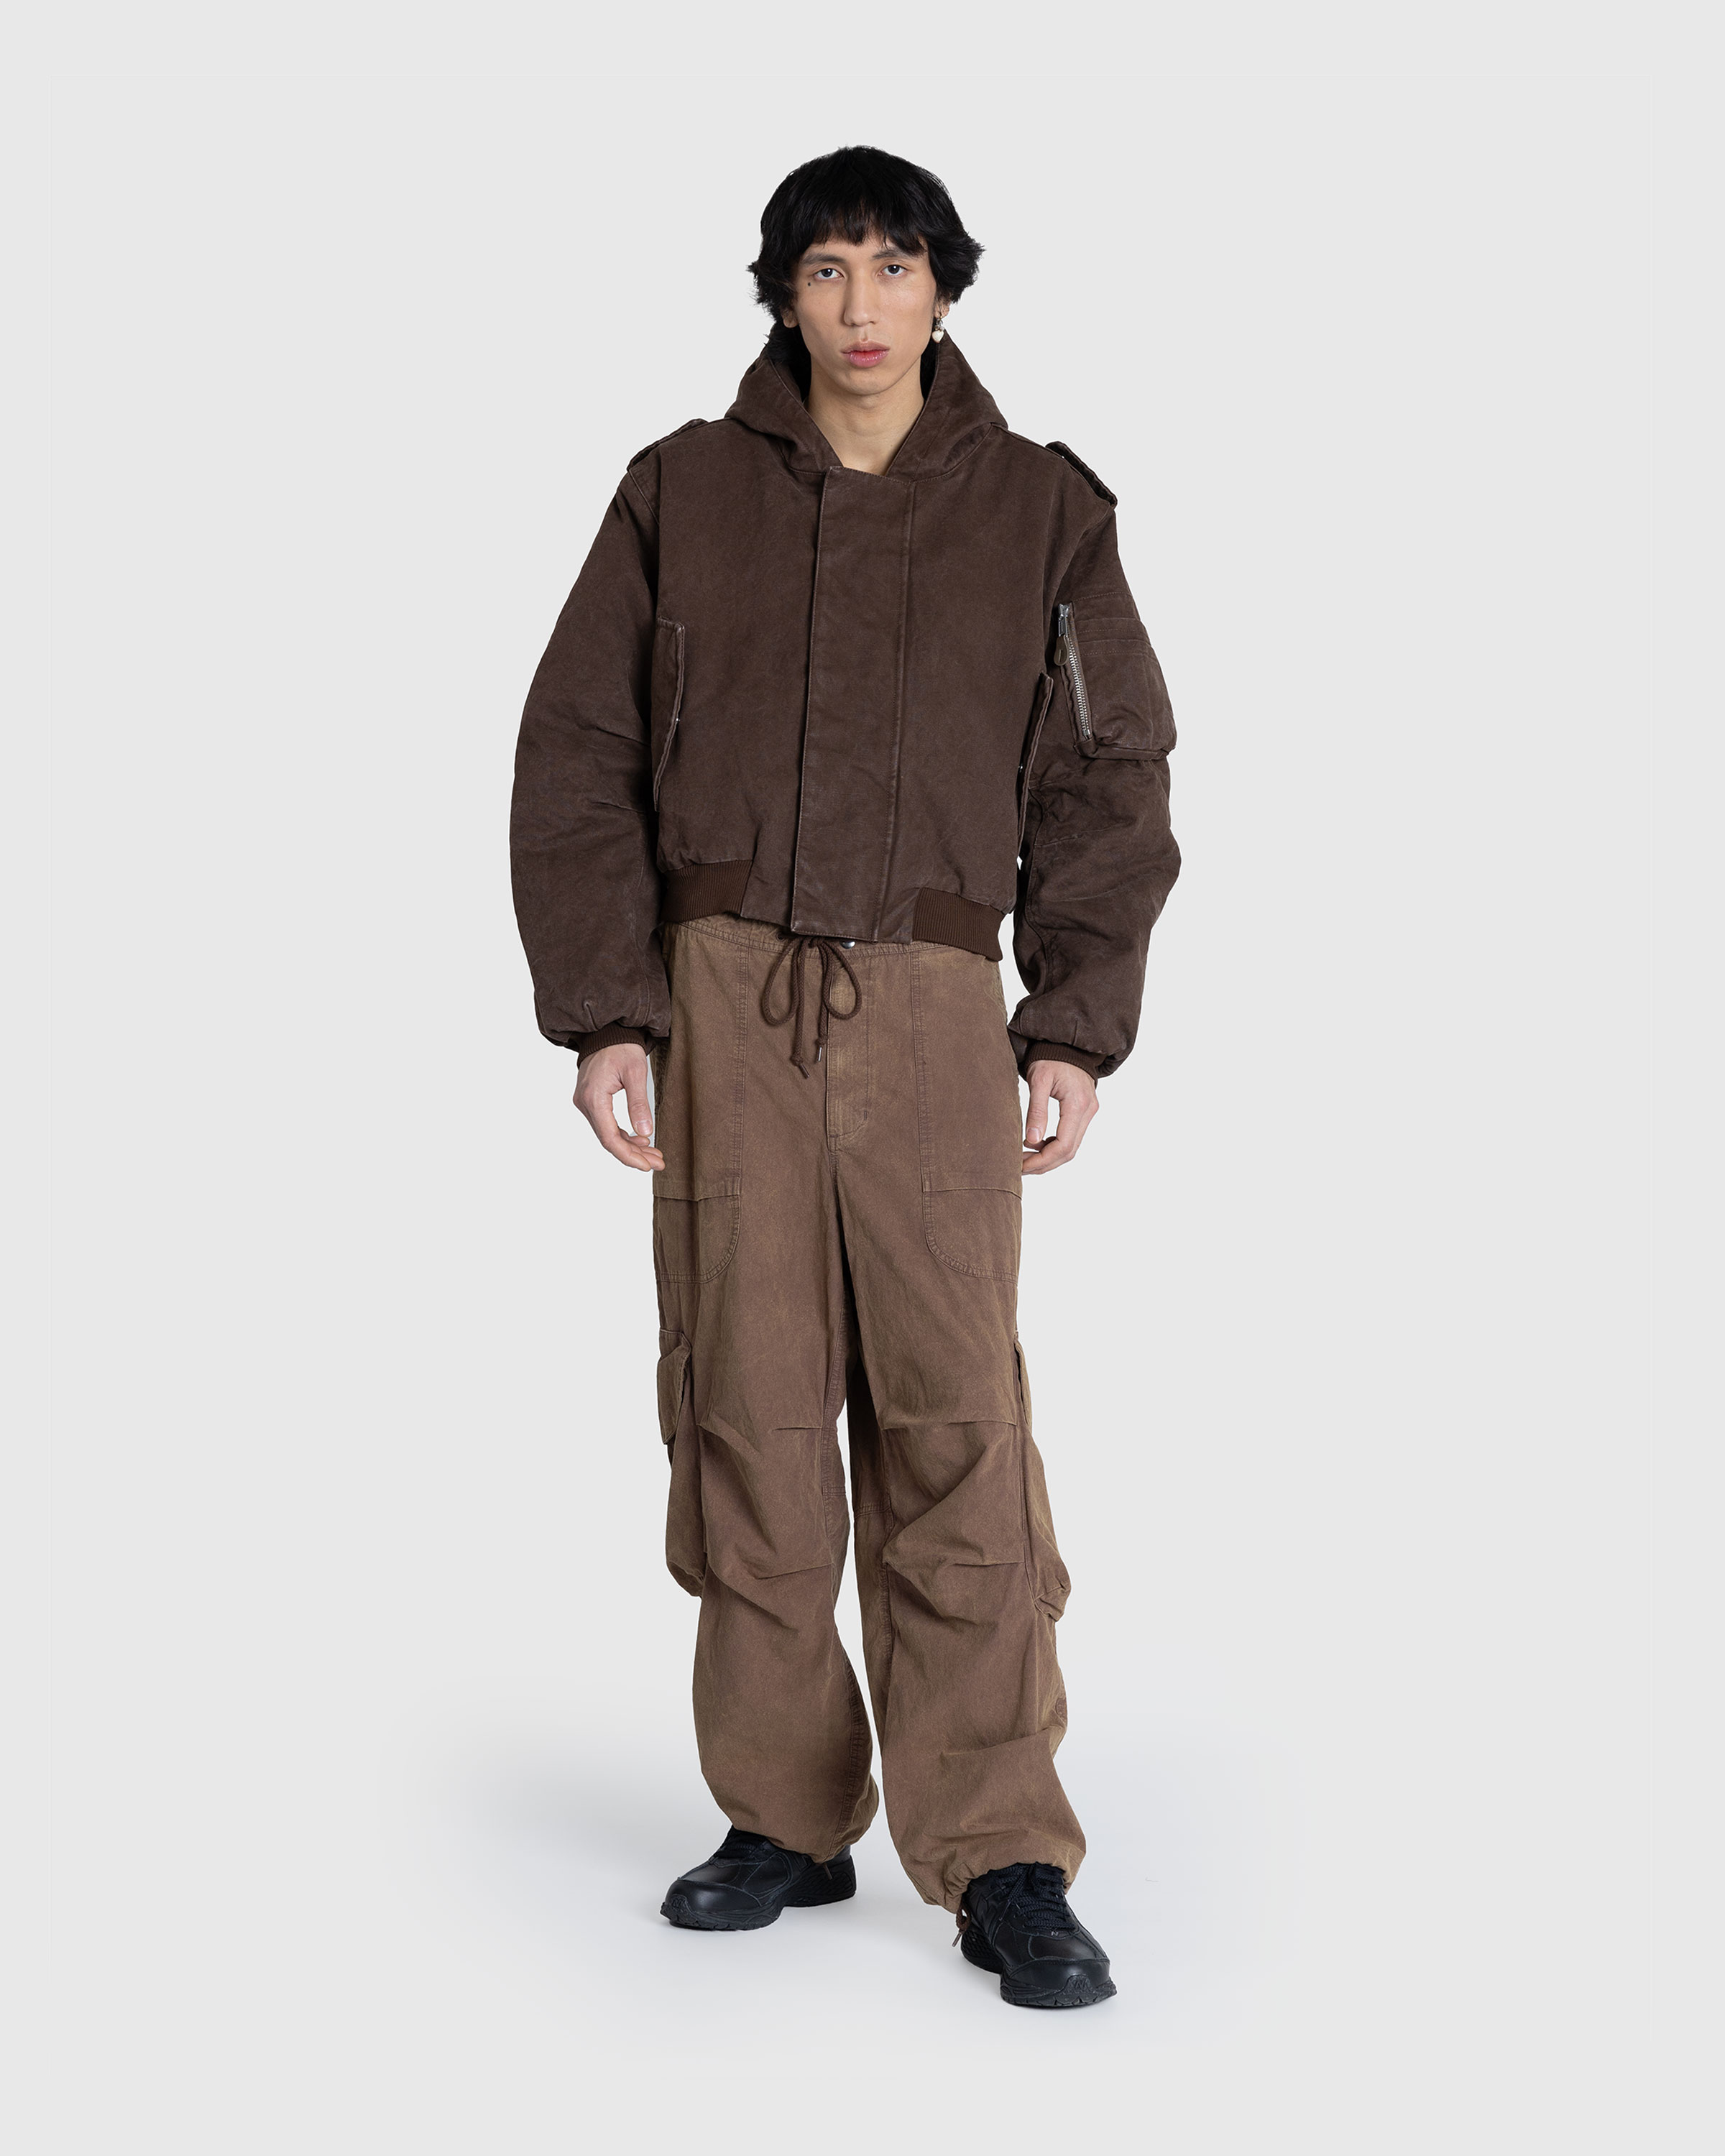 Entire Studios – W2 Bomber Military Mud - Outerwear - Brown - Image 3